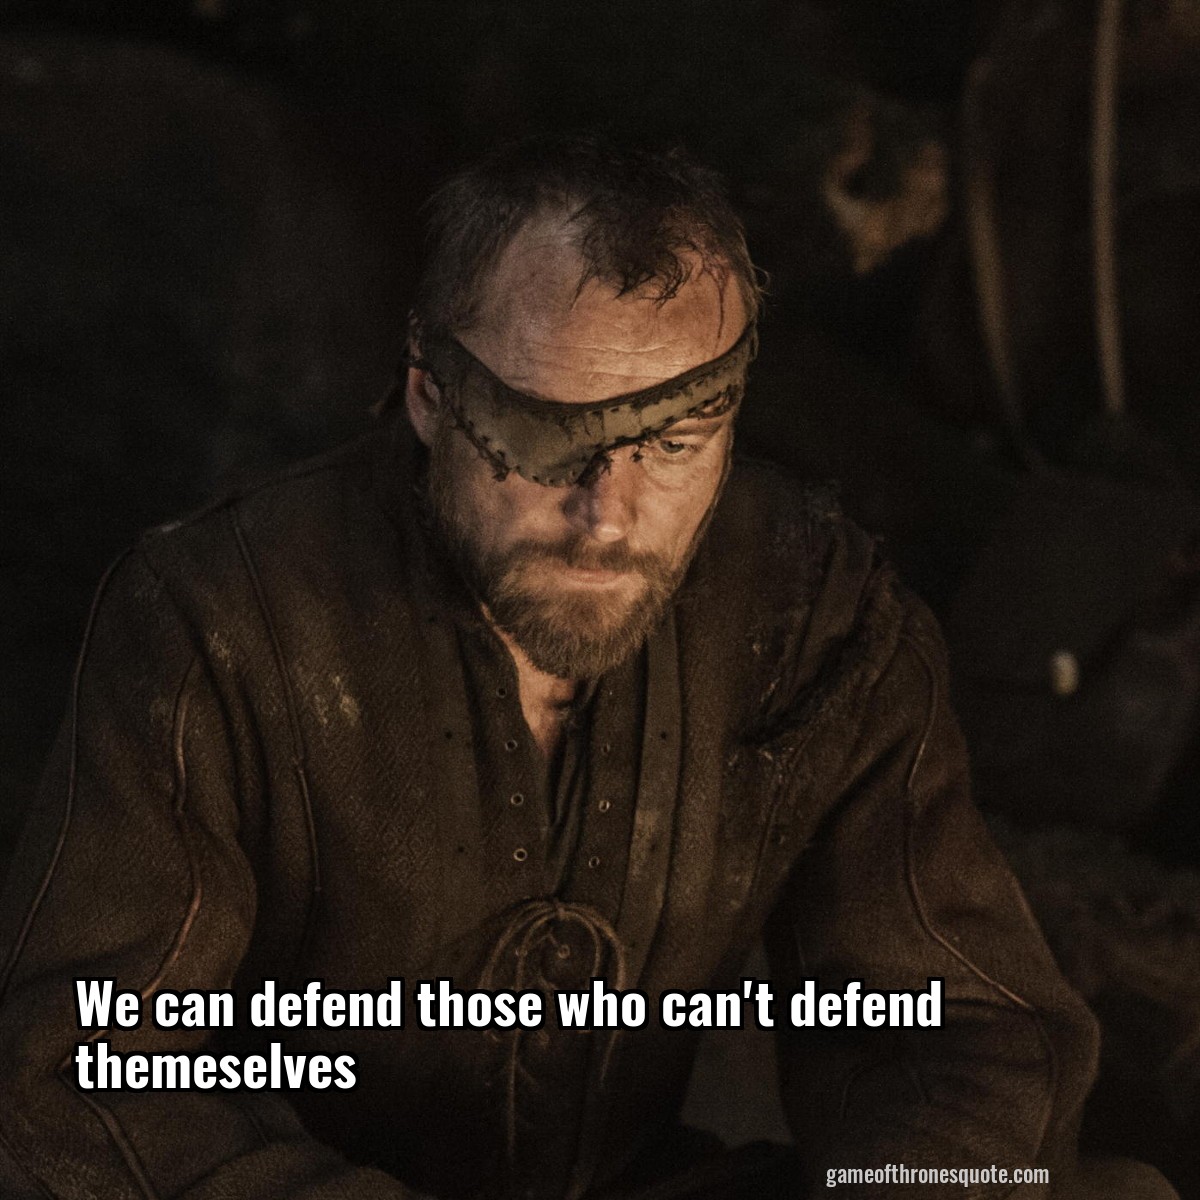 We can defend those who can't defend themeselves